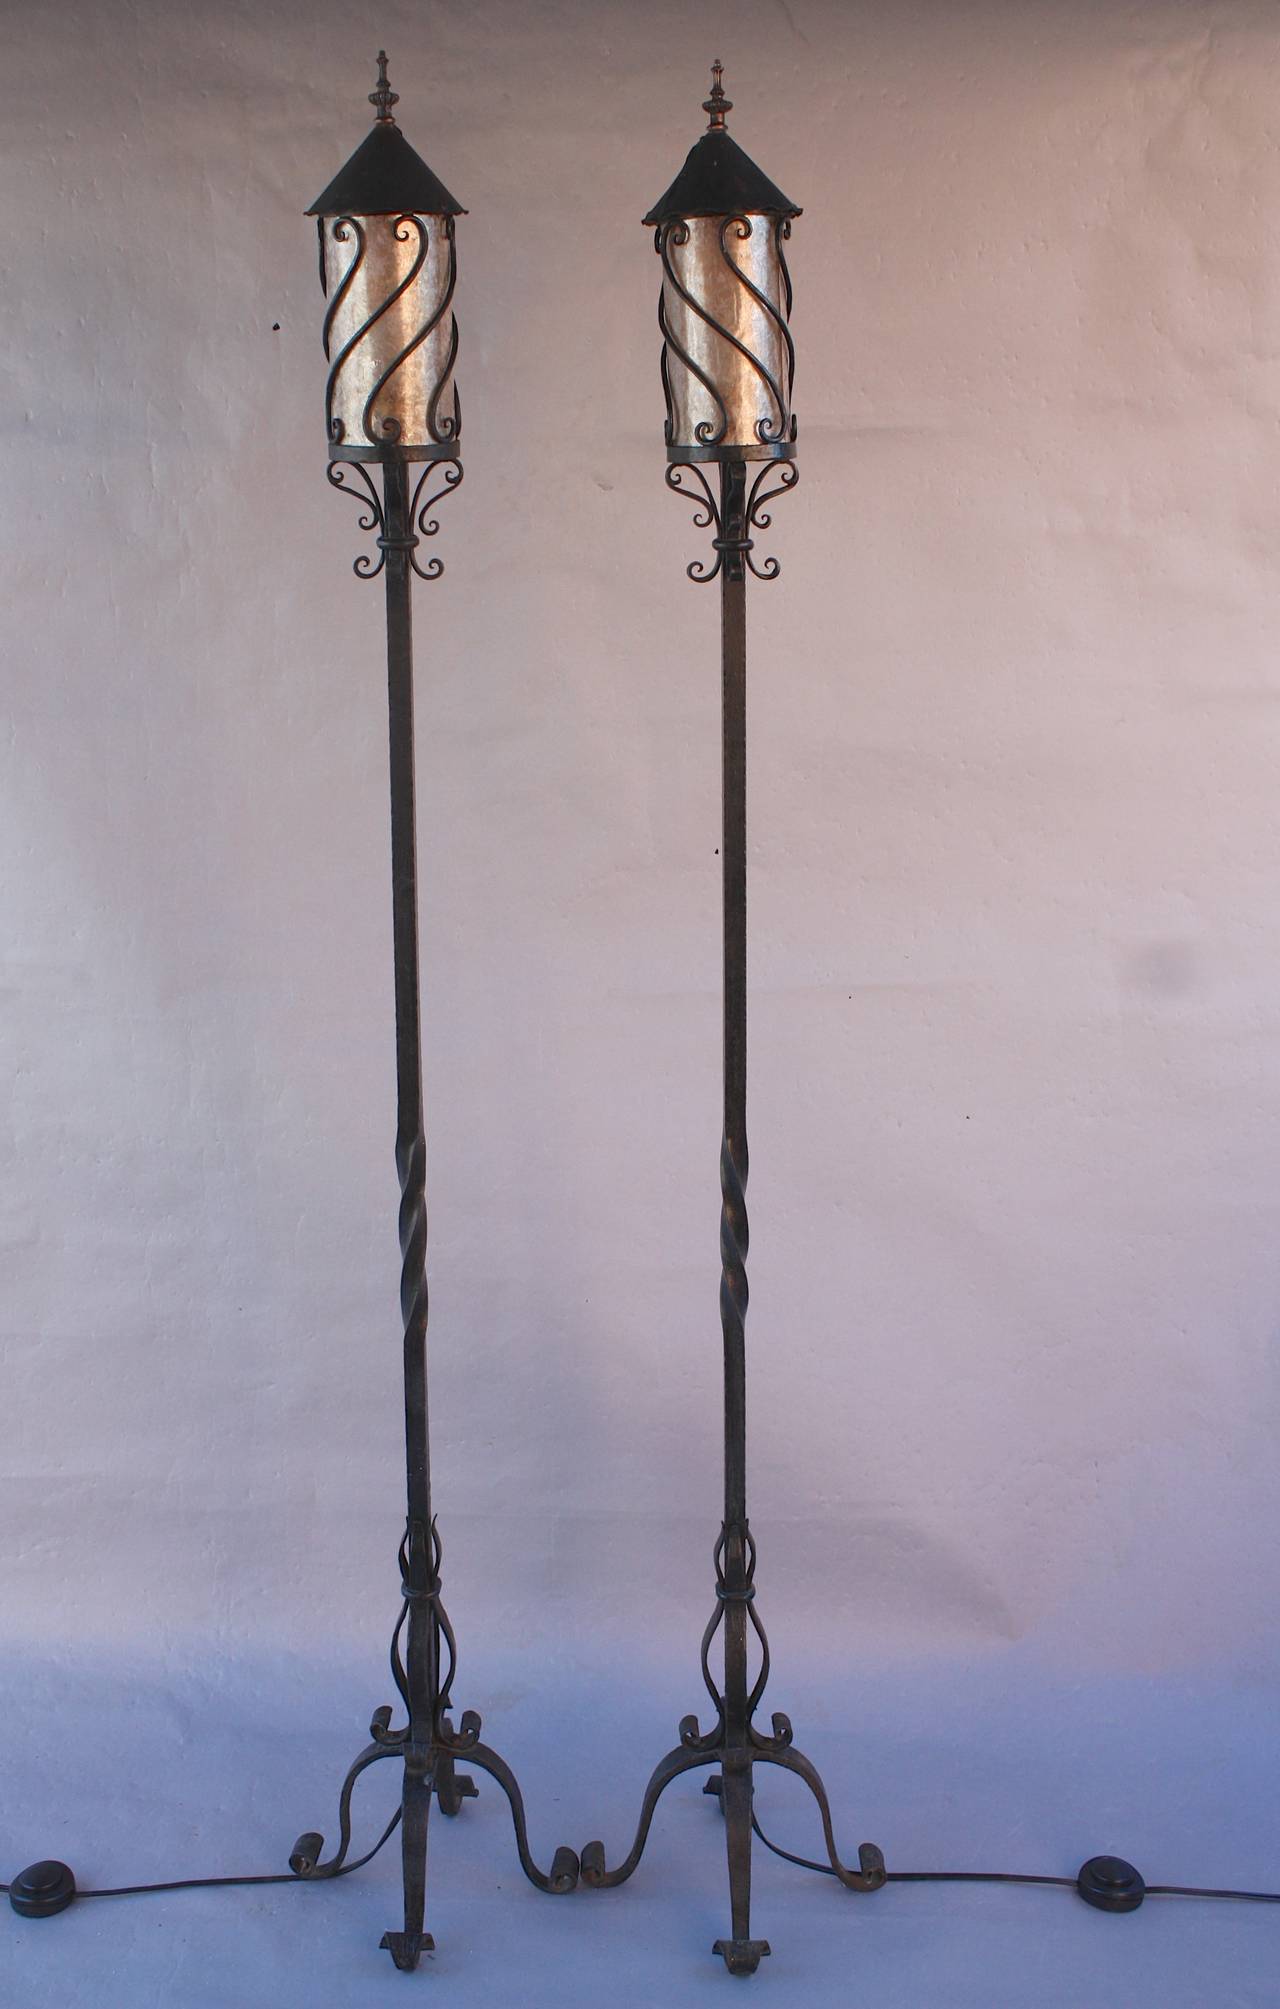 Pair of wrought iron torchieres with new mica, circa 1930s. Wrought iron construction. Dimension: 12